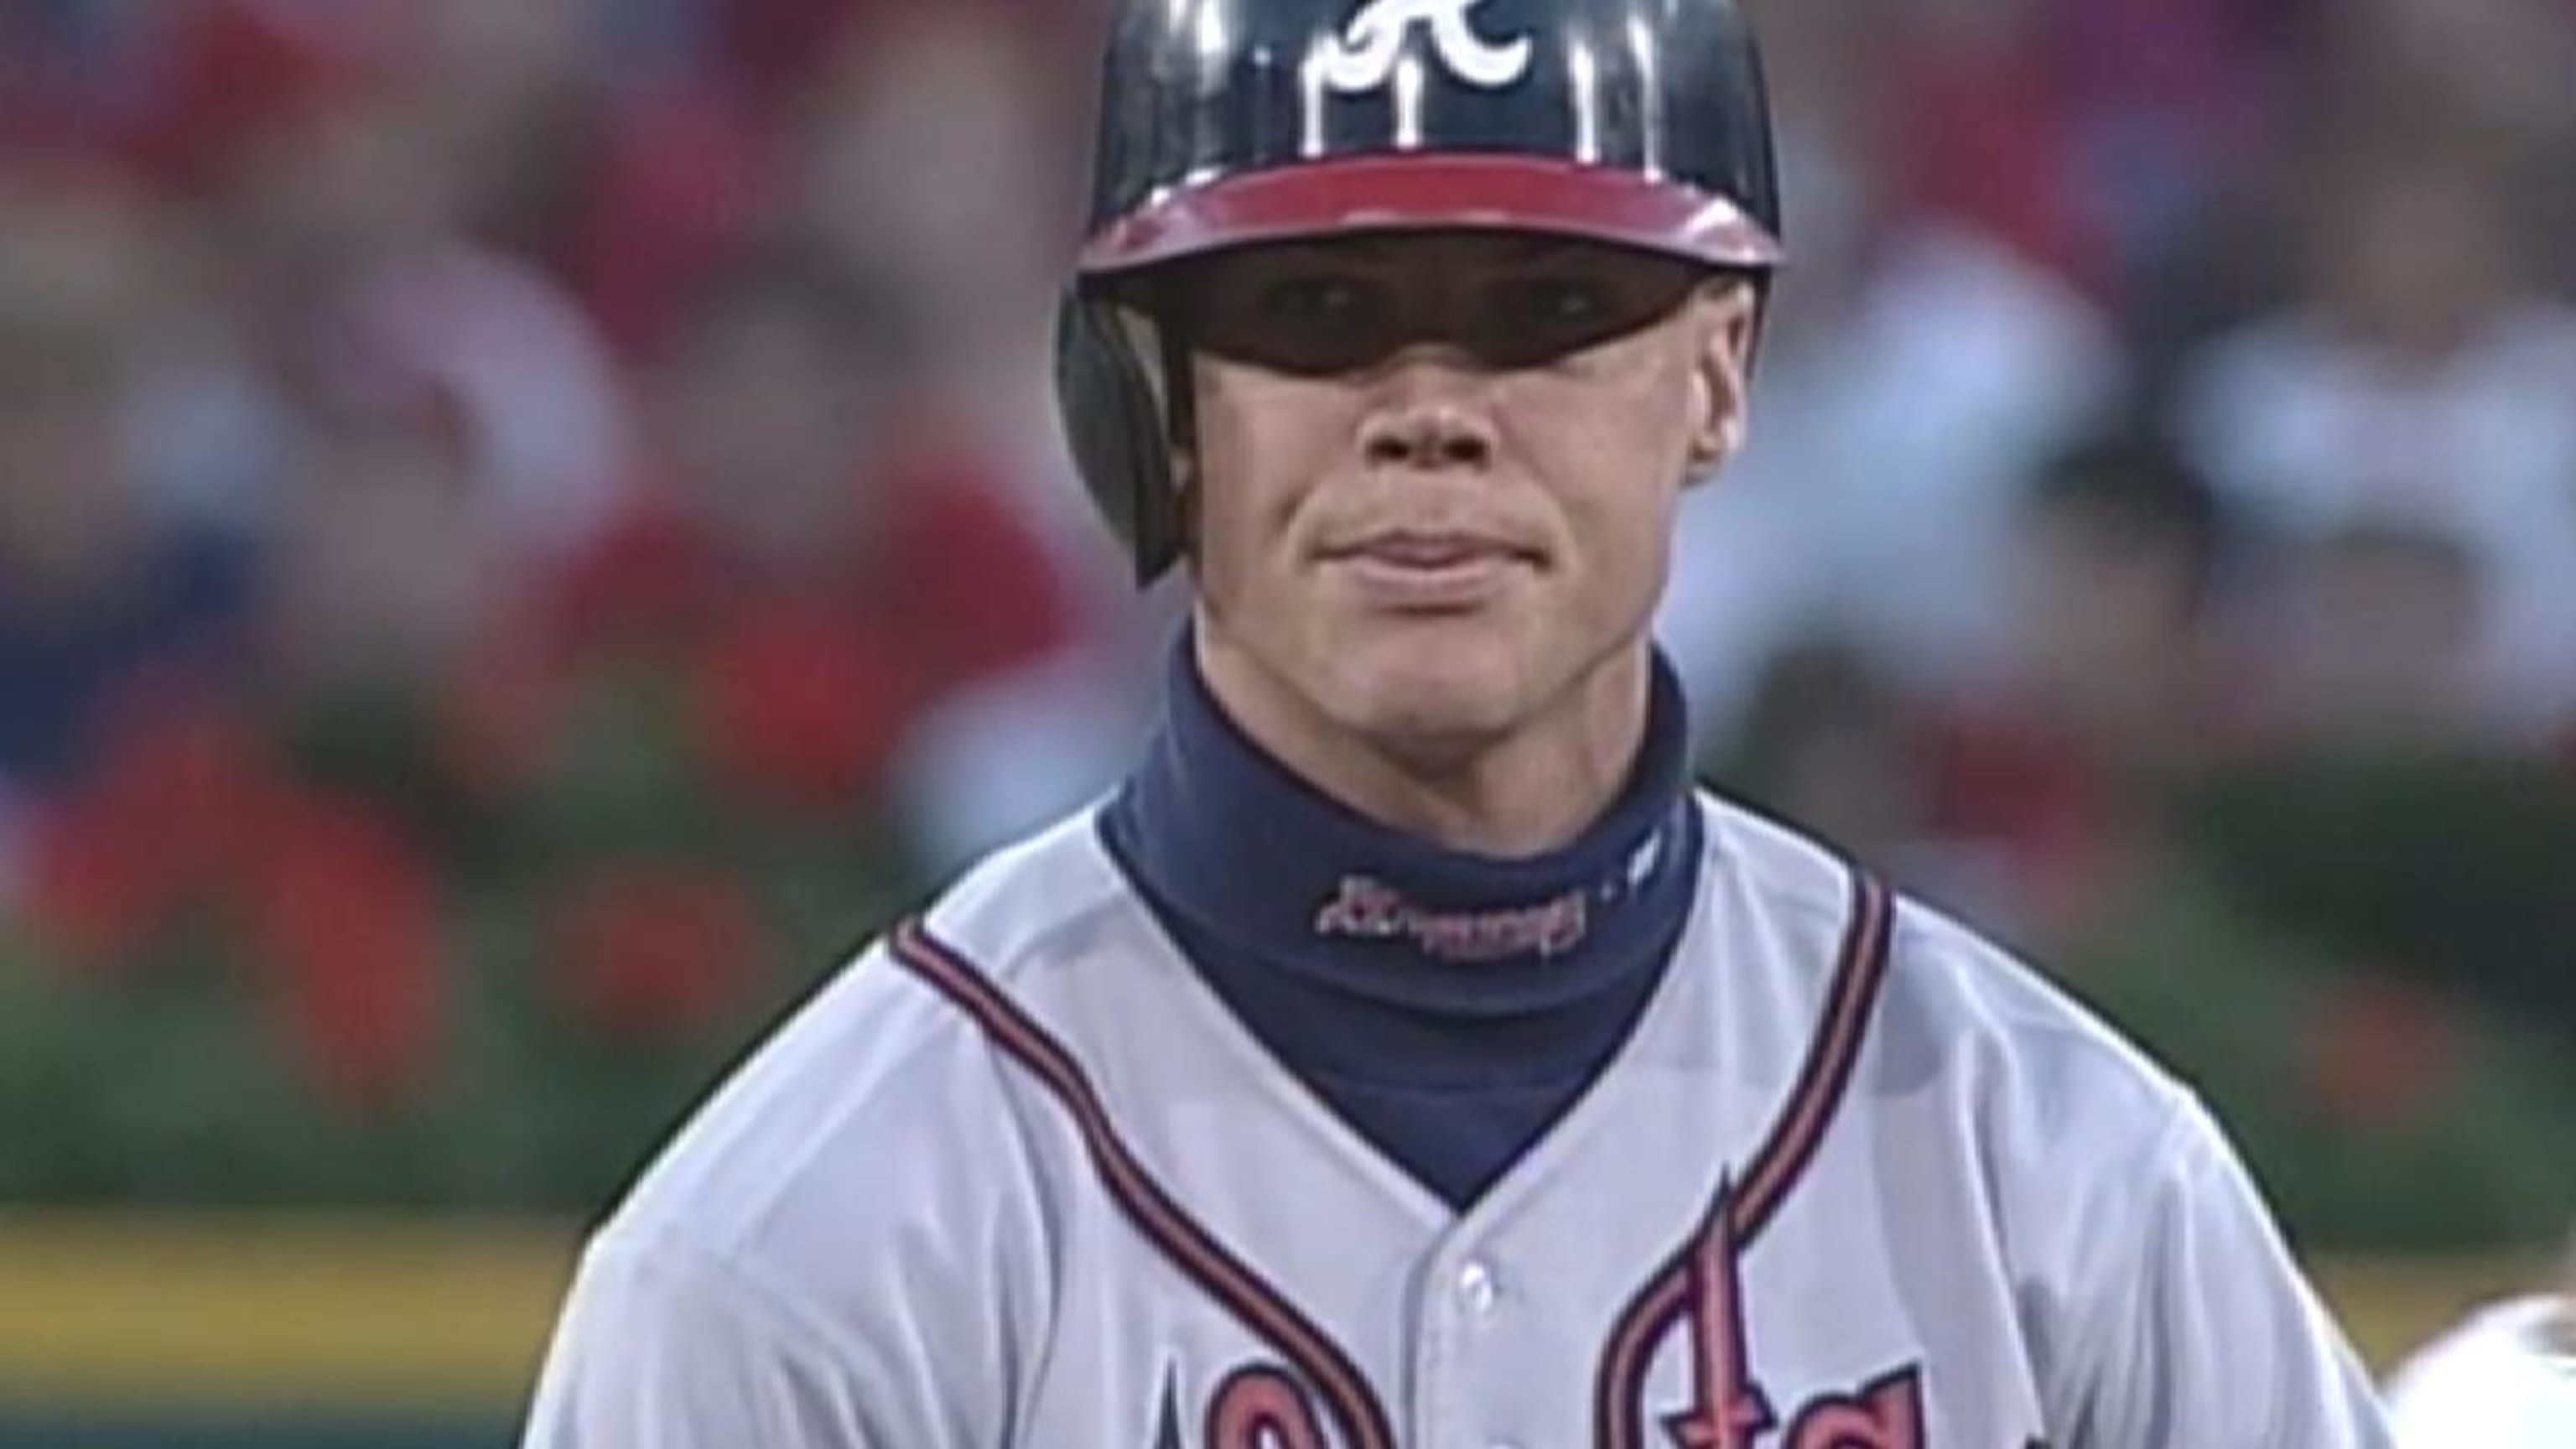 Young Chipper Jones began his baseball career on the fields of Pierson